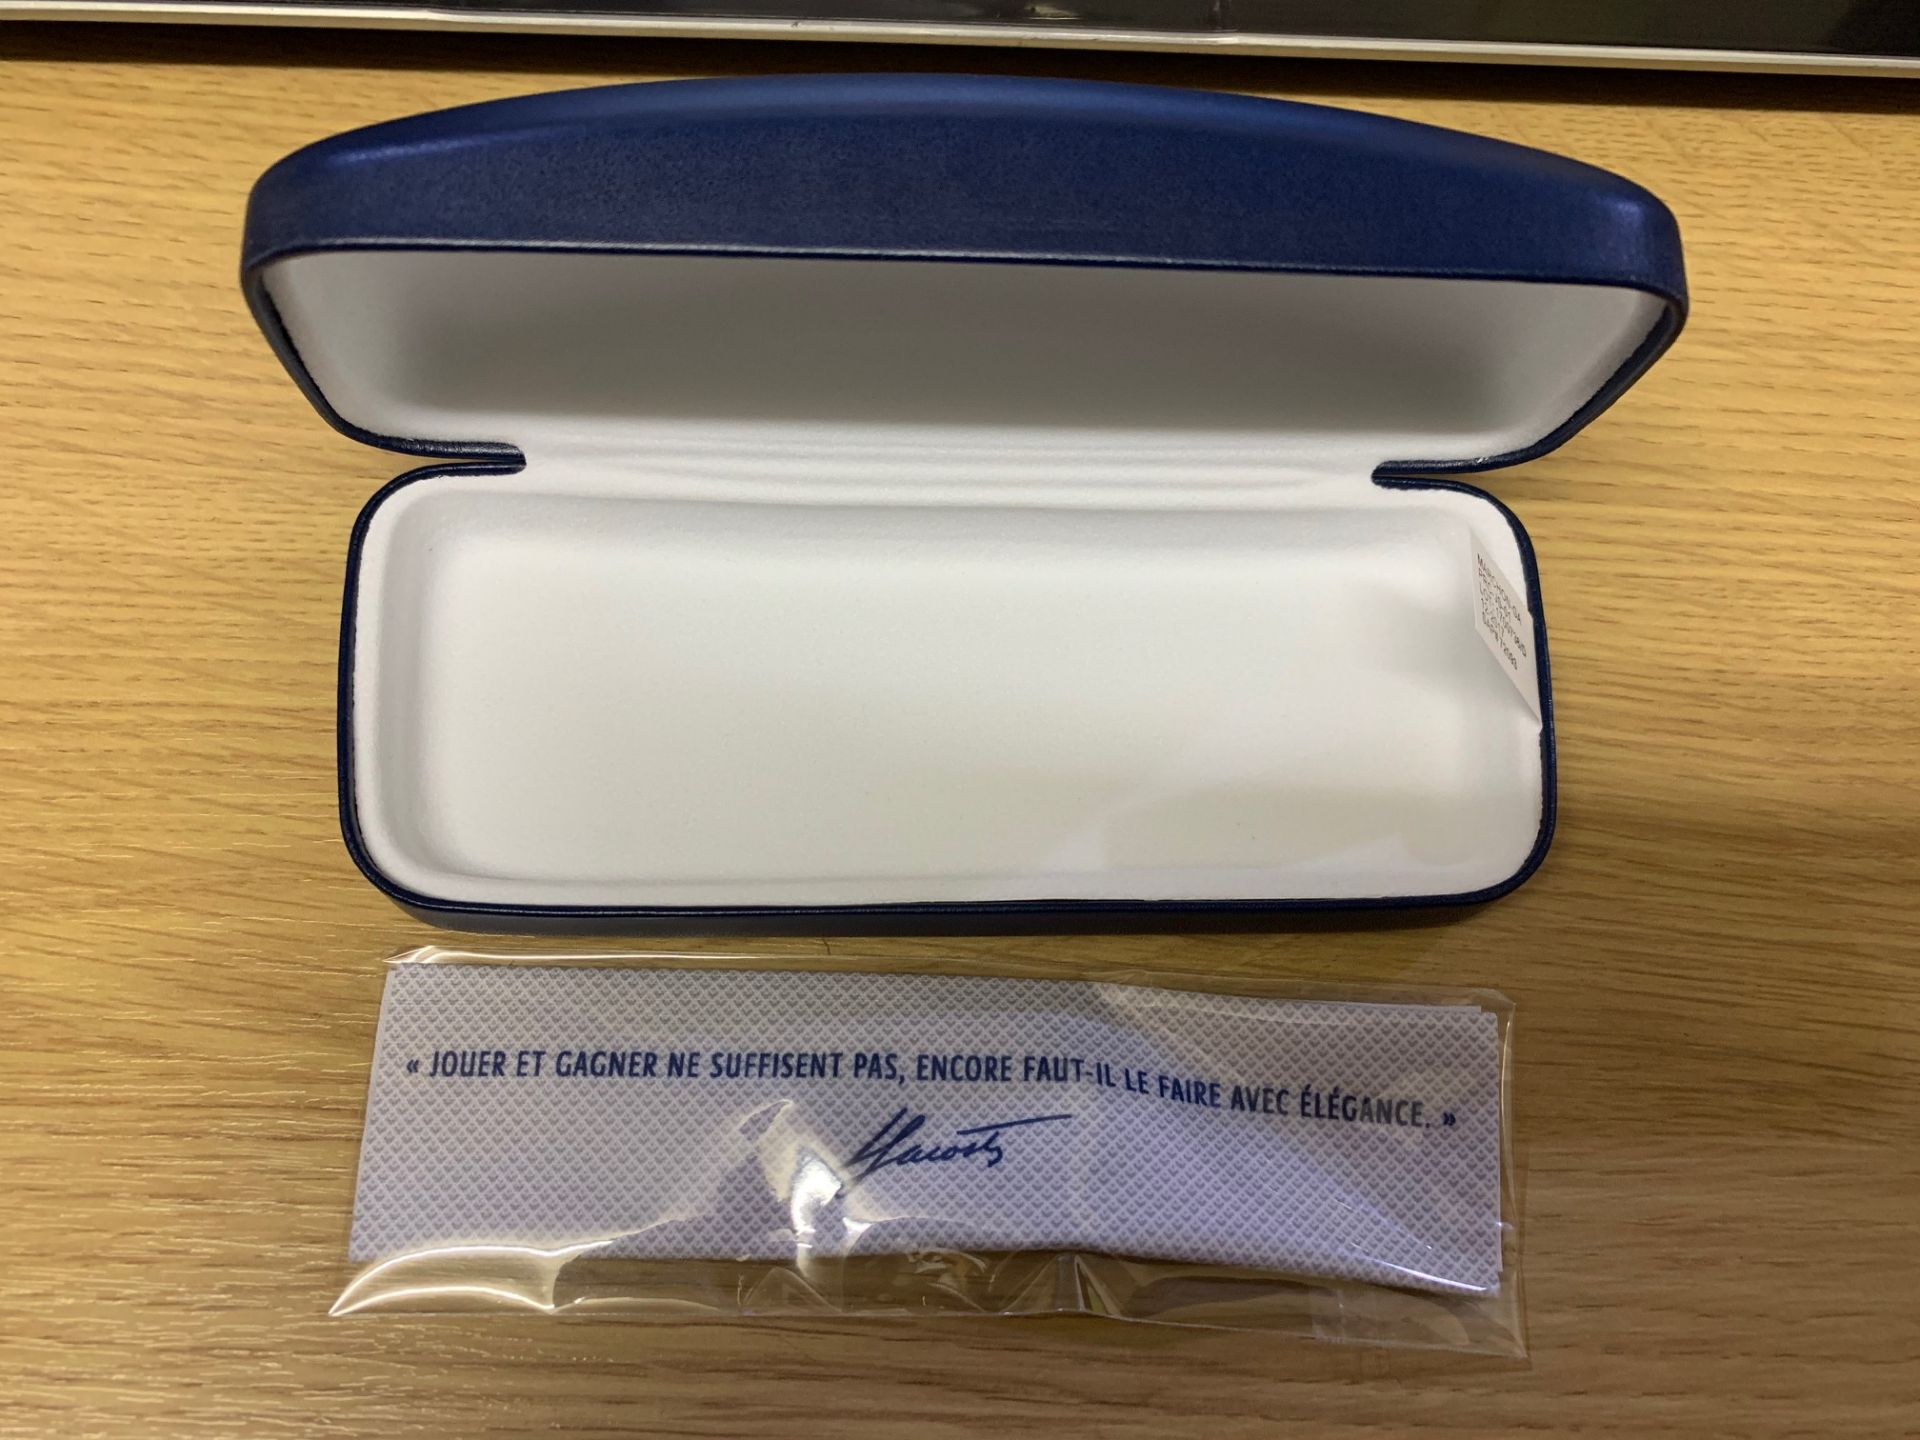 4 x Lacoste Glasses Case Blue (Brand New) - Image 2 of 3